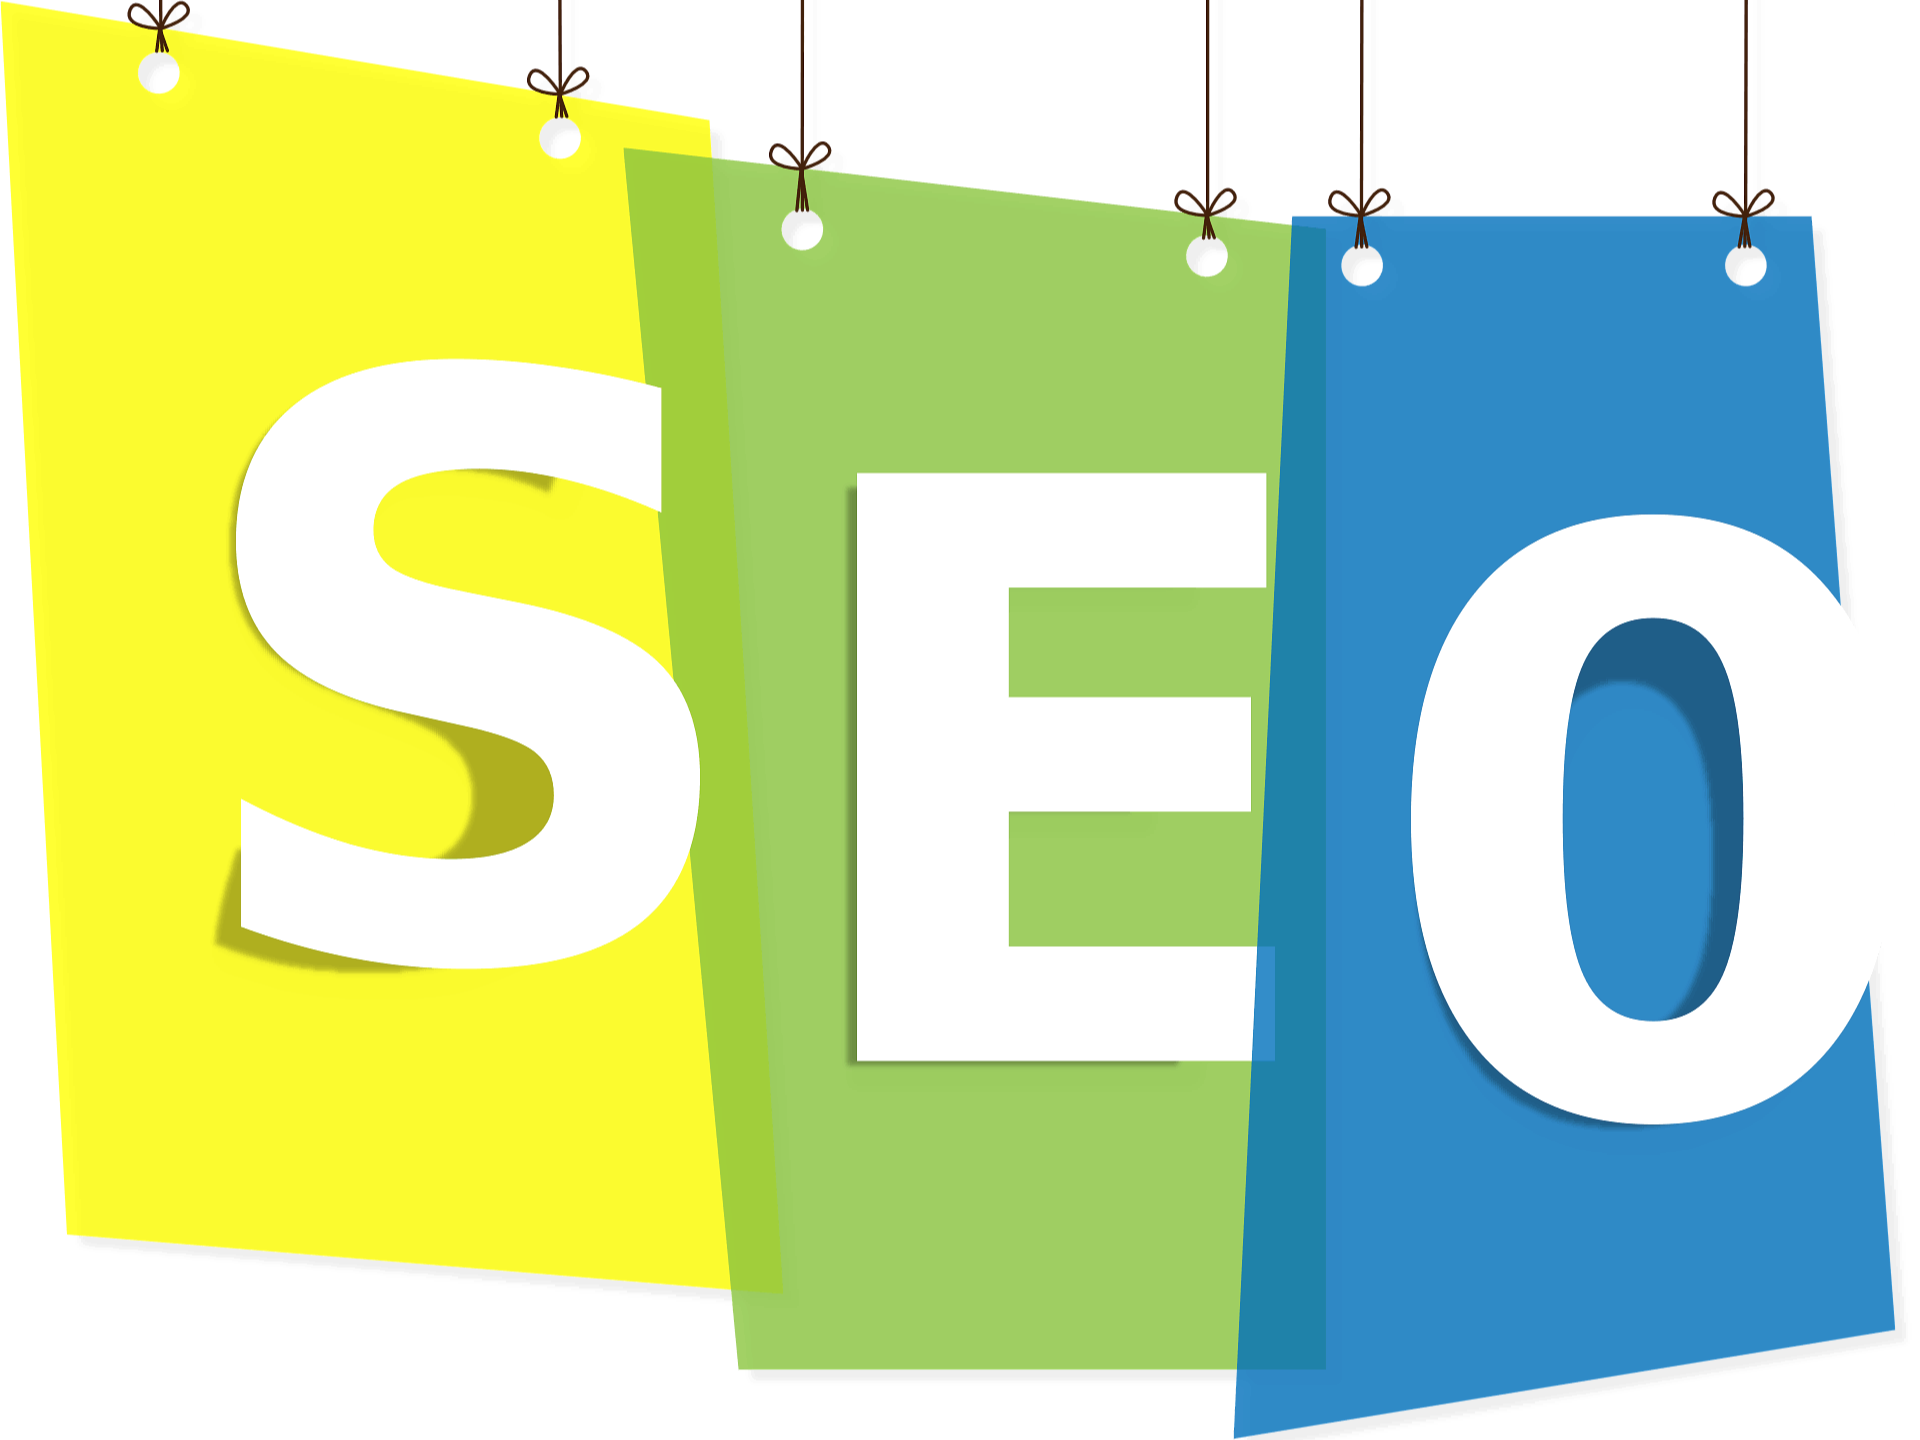 seo consulting, keyword research, site audit, local seo, on-page seo, off-page seo, free seo tool